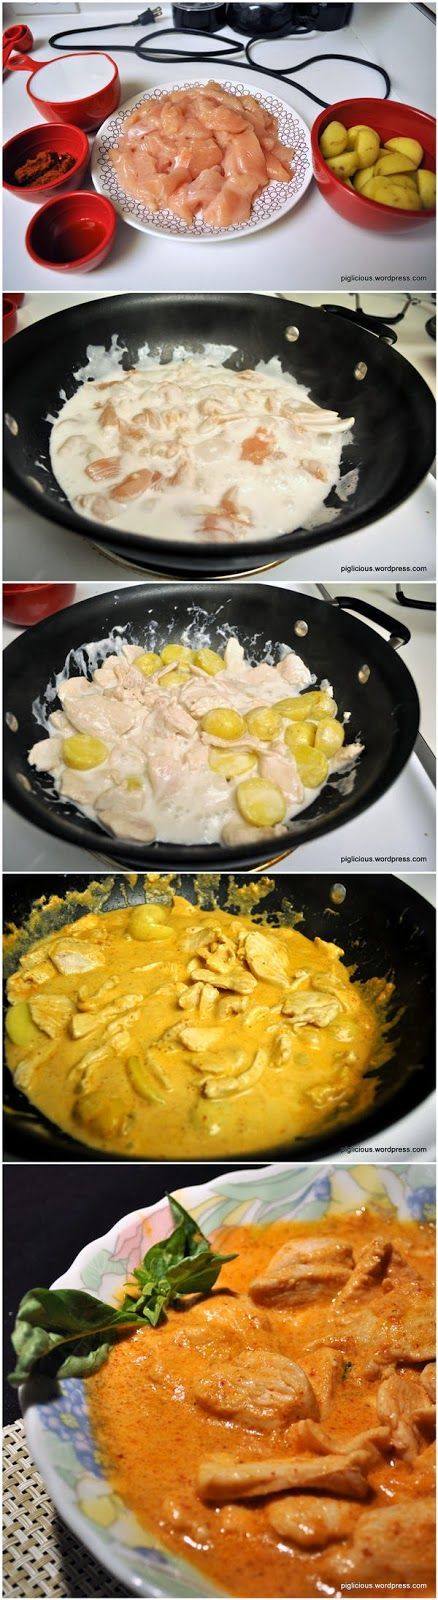 Thai Curry Chicken – 1 lb chicken breast fillets 2 teaspoons vegetable oil 1 cup coconut milk 2 1/2 tablespoons panang curry paste